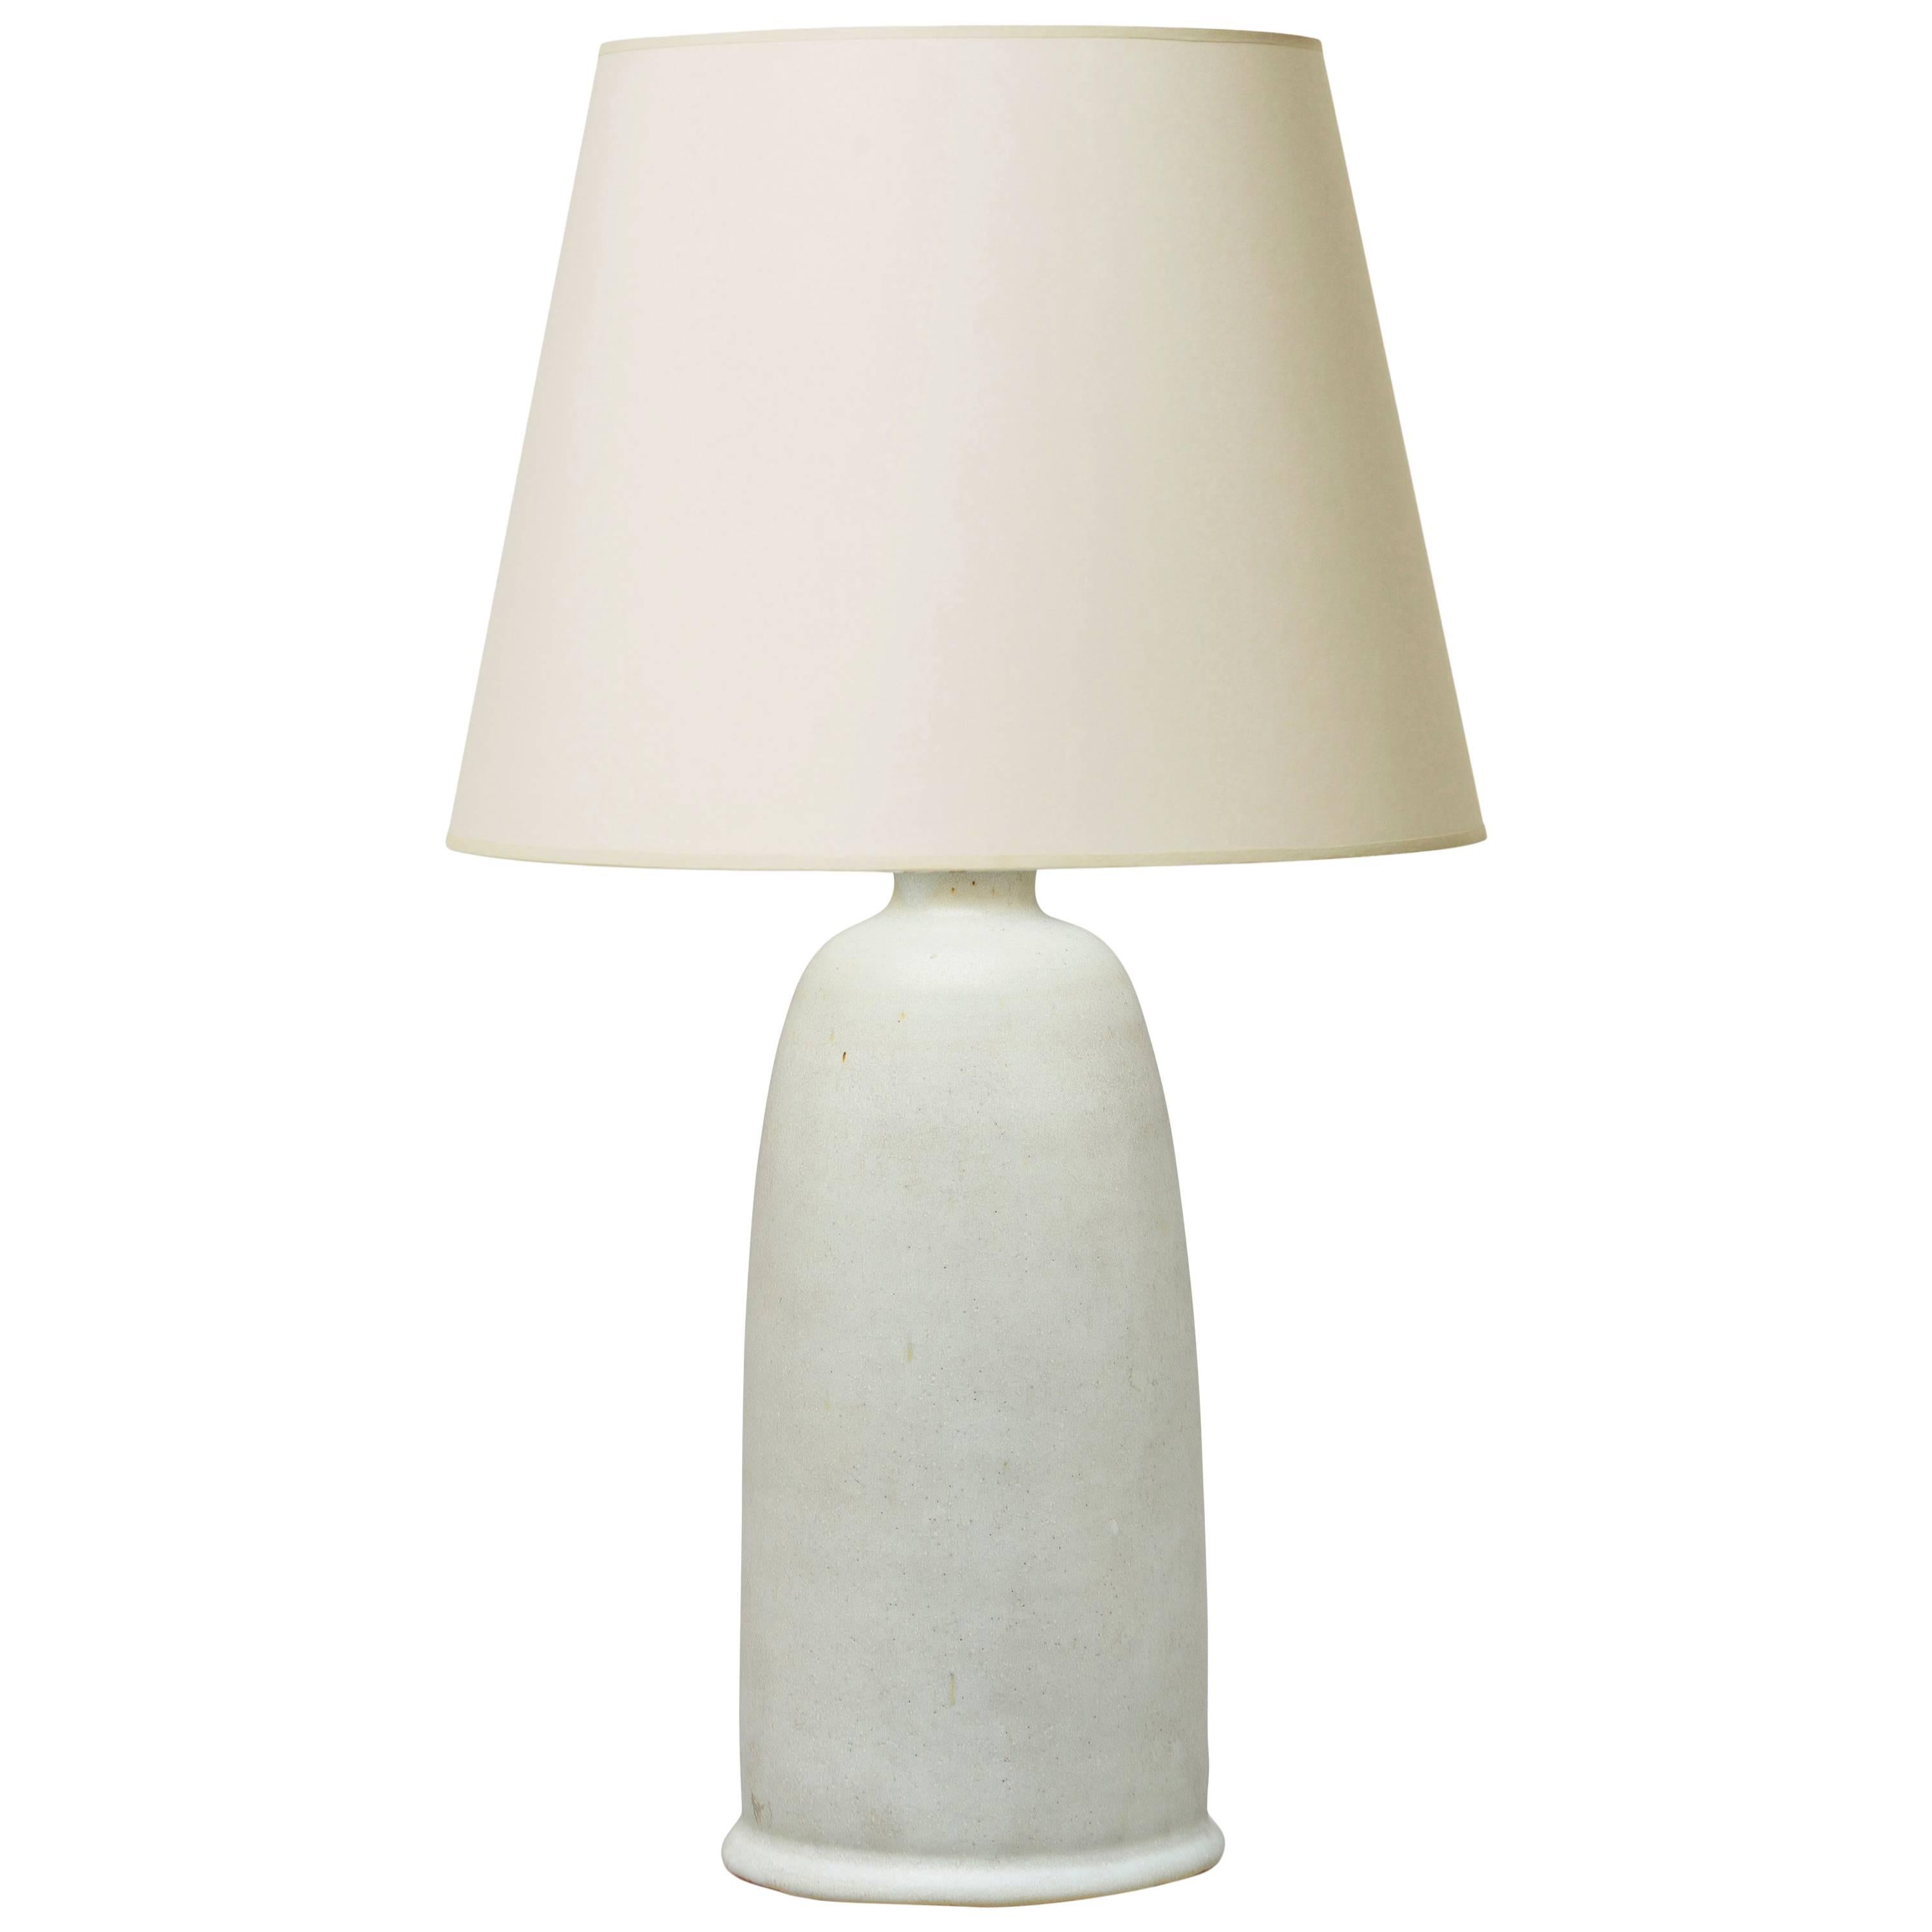 Organically Modeled Functionalist Table Lamp by the Iconic Tobo Studio For Sale